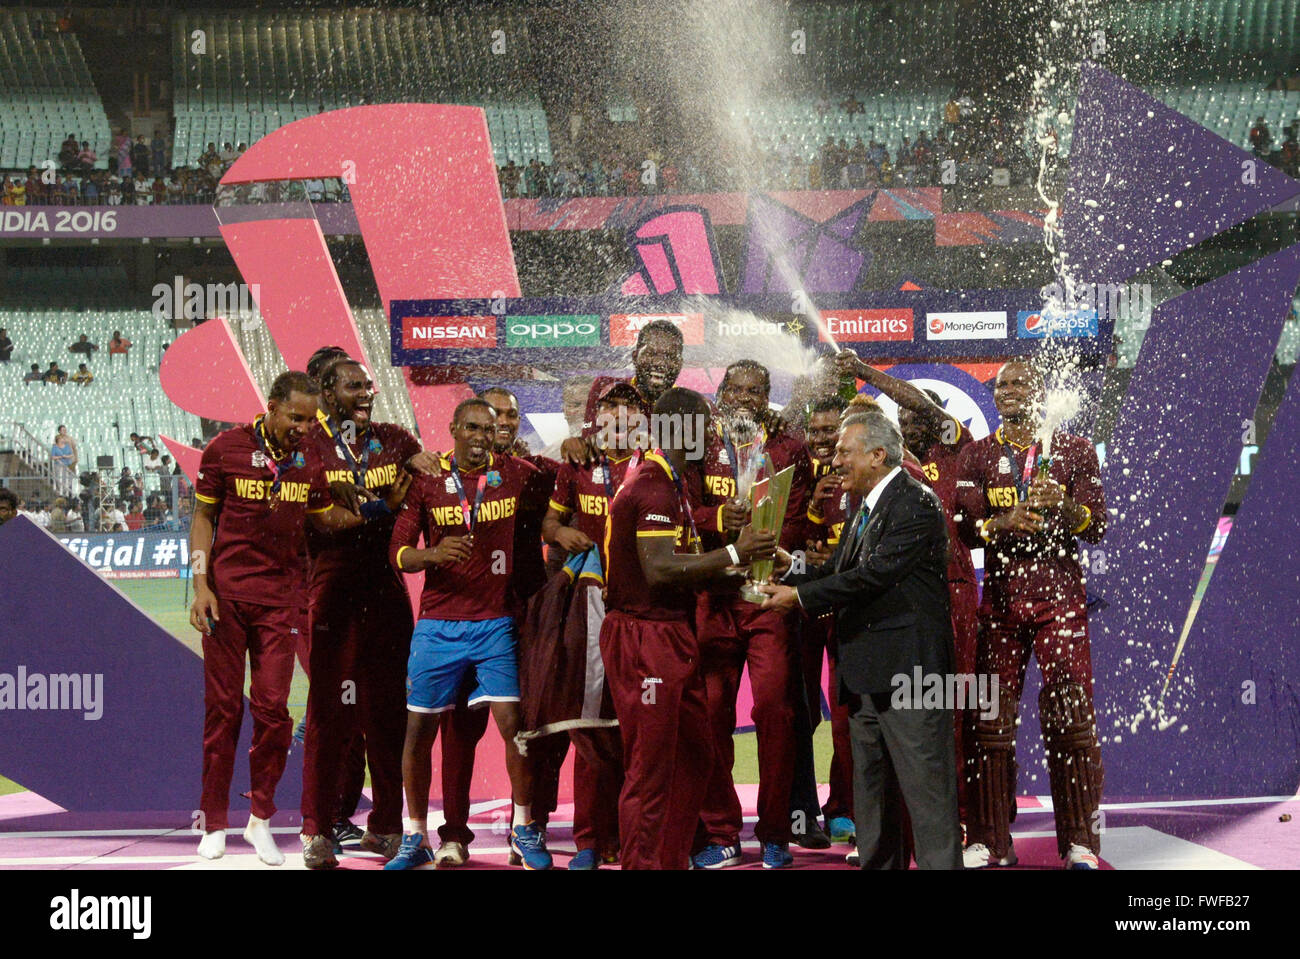 West indies team celebrate their World T20 win, women team member also join this celebration during ICC World T20 final match. West Indies beat England by four wickets in ICC T20 final at Eden Gardens, Kolkata. England batted first and scored 155 for 9 wickets by the help of Roots half century. Chasing the target West Indies win the game two delivers to left and four wickets in hand. Samuel score magnificent 85 and Brathwaite scored not out 34. Samuel grabs the player of the match award and India's Virat Kohli get player of player of the tournaments. (Photo by Saikat Paul/Pacific Press) Stock Photo